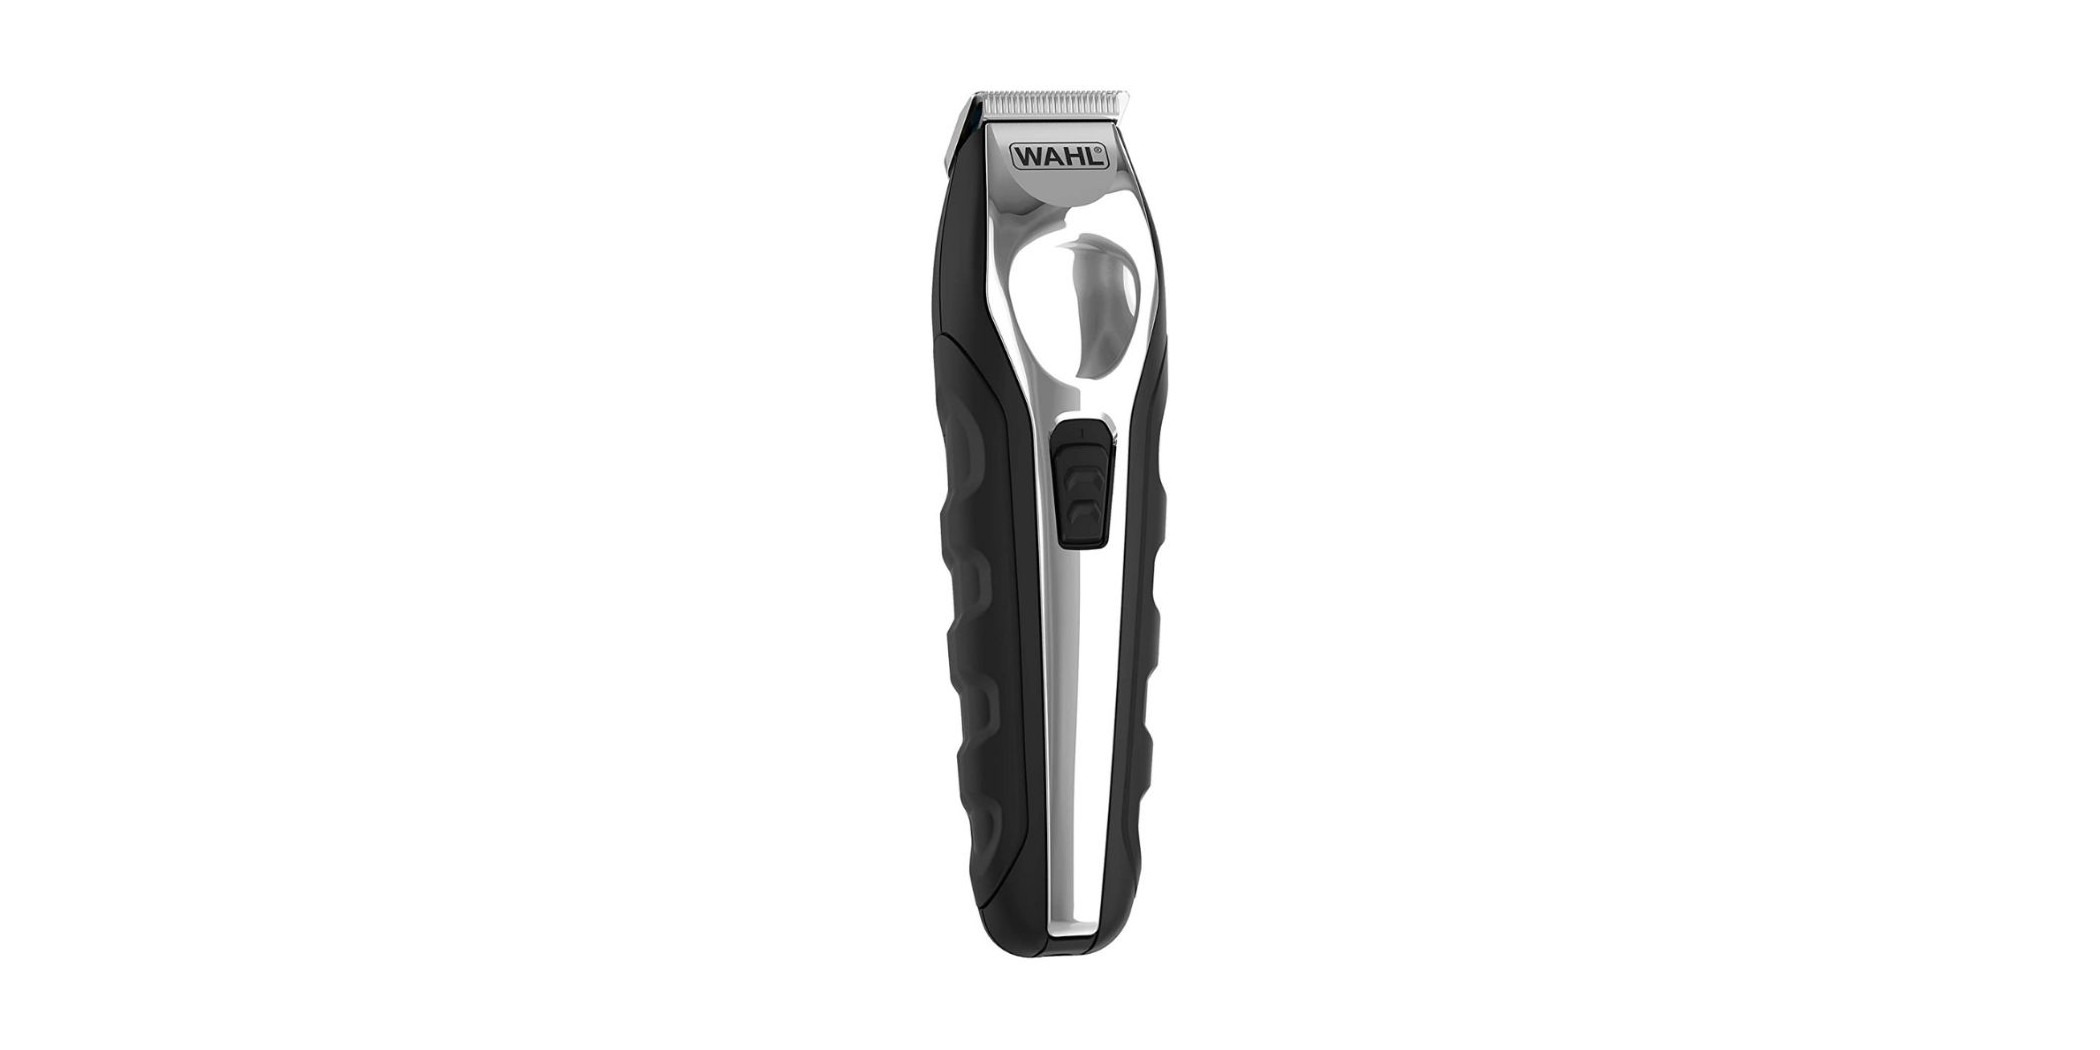 Wahl 9888-1227/1216 Lithium Ion Rechargeable Trimmer 2YW